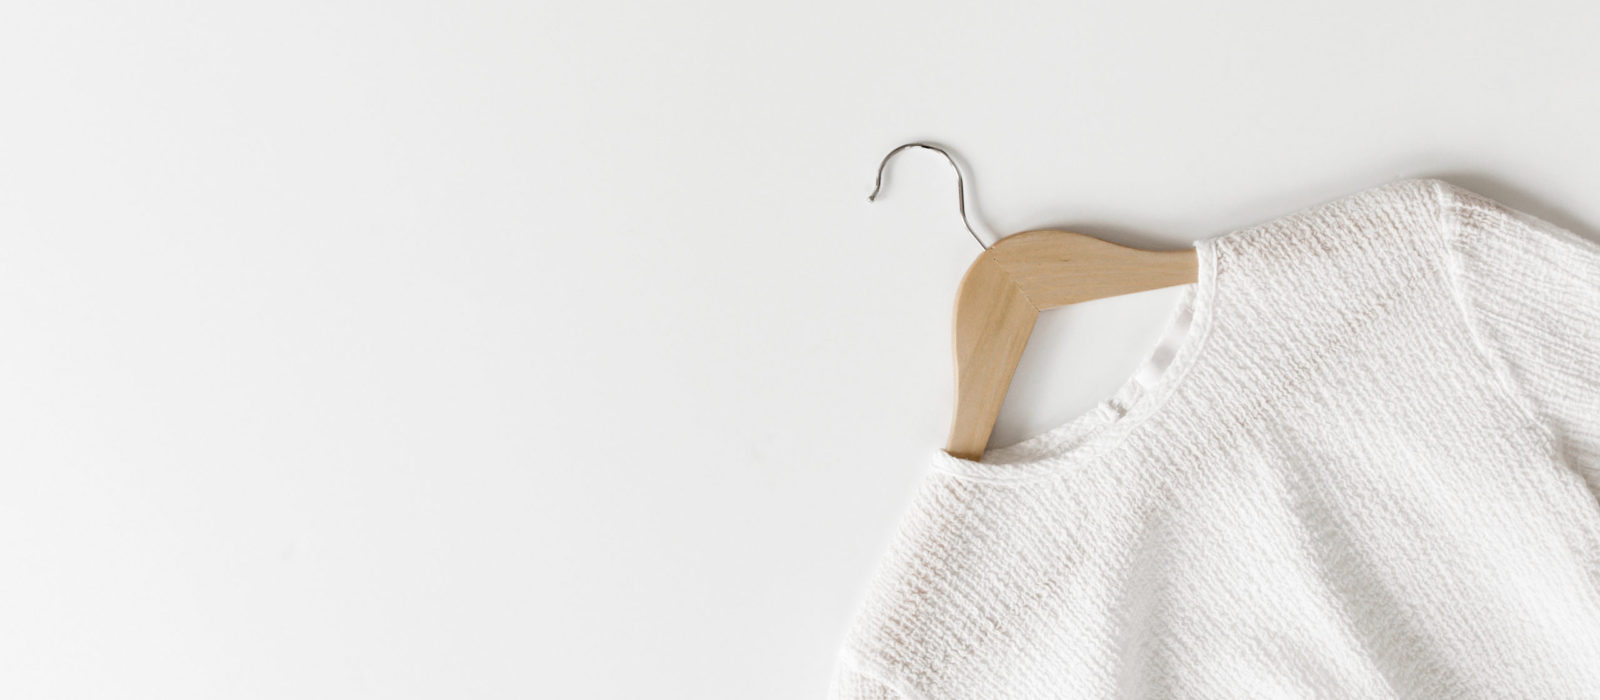 How to Make Clothes Last Longer: 7 Easy Tips to Help Your Wardrobe (And Your Wallet)